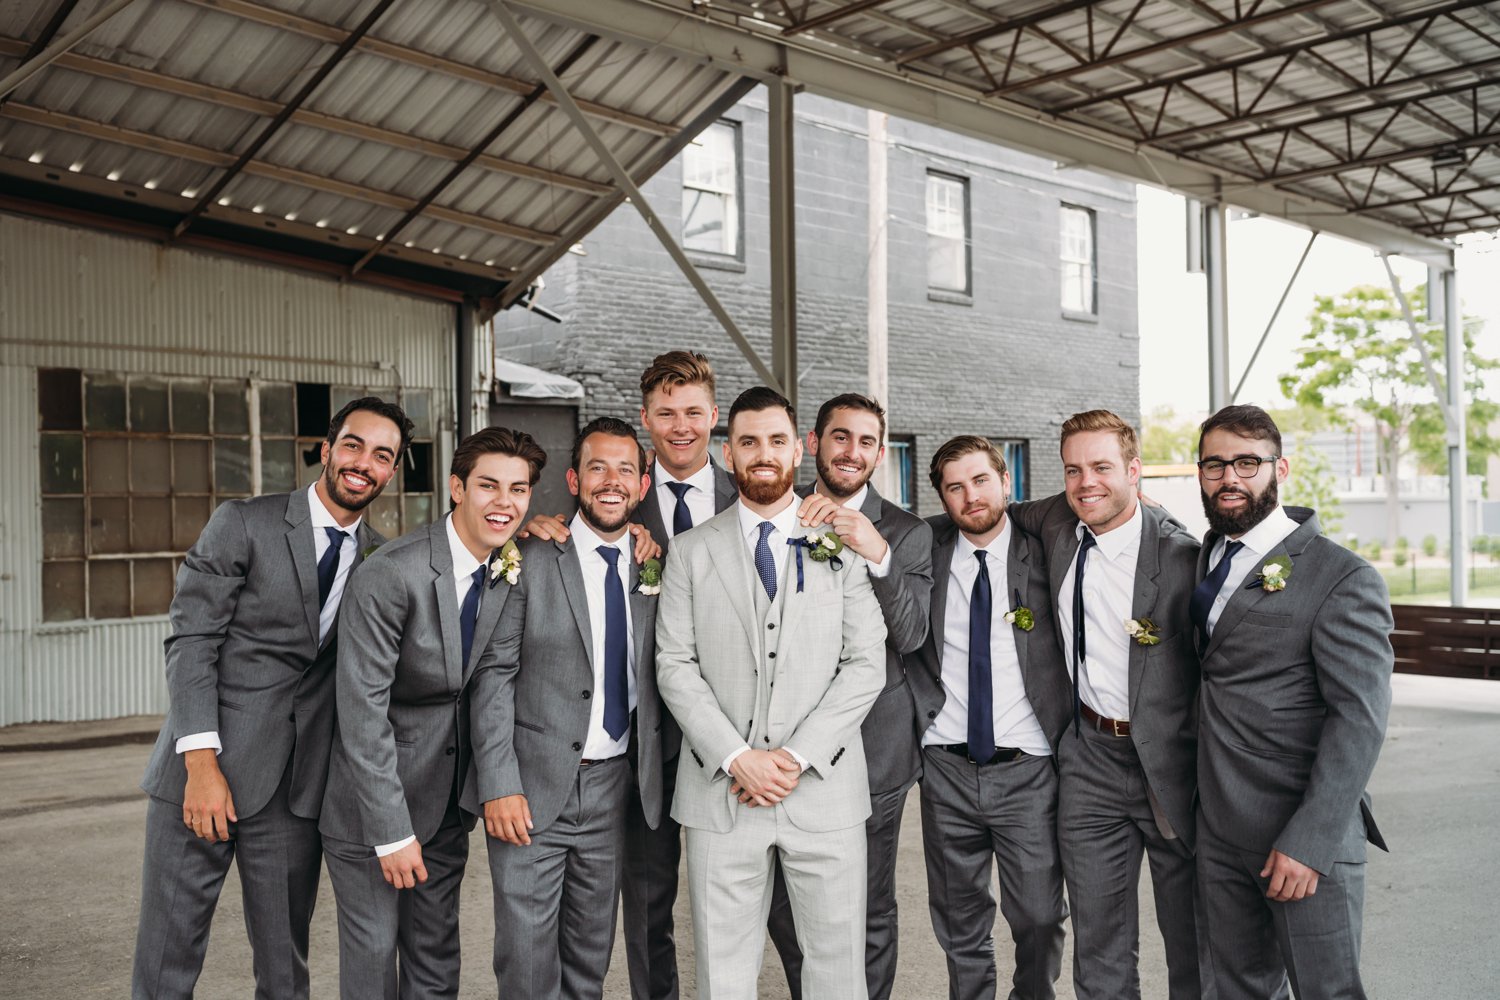  images by feliciathephotographer.com | destination wedding photographer | kansas city | spring time | groomsmen | silly | portraits | blue striped socks | grey suits | the black tux | navy tie | industrial | modern |